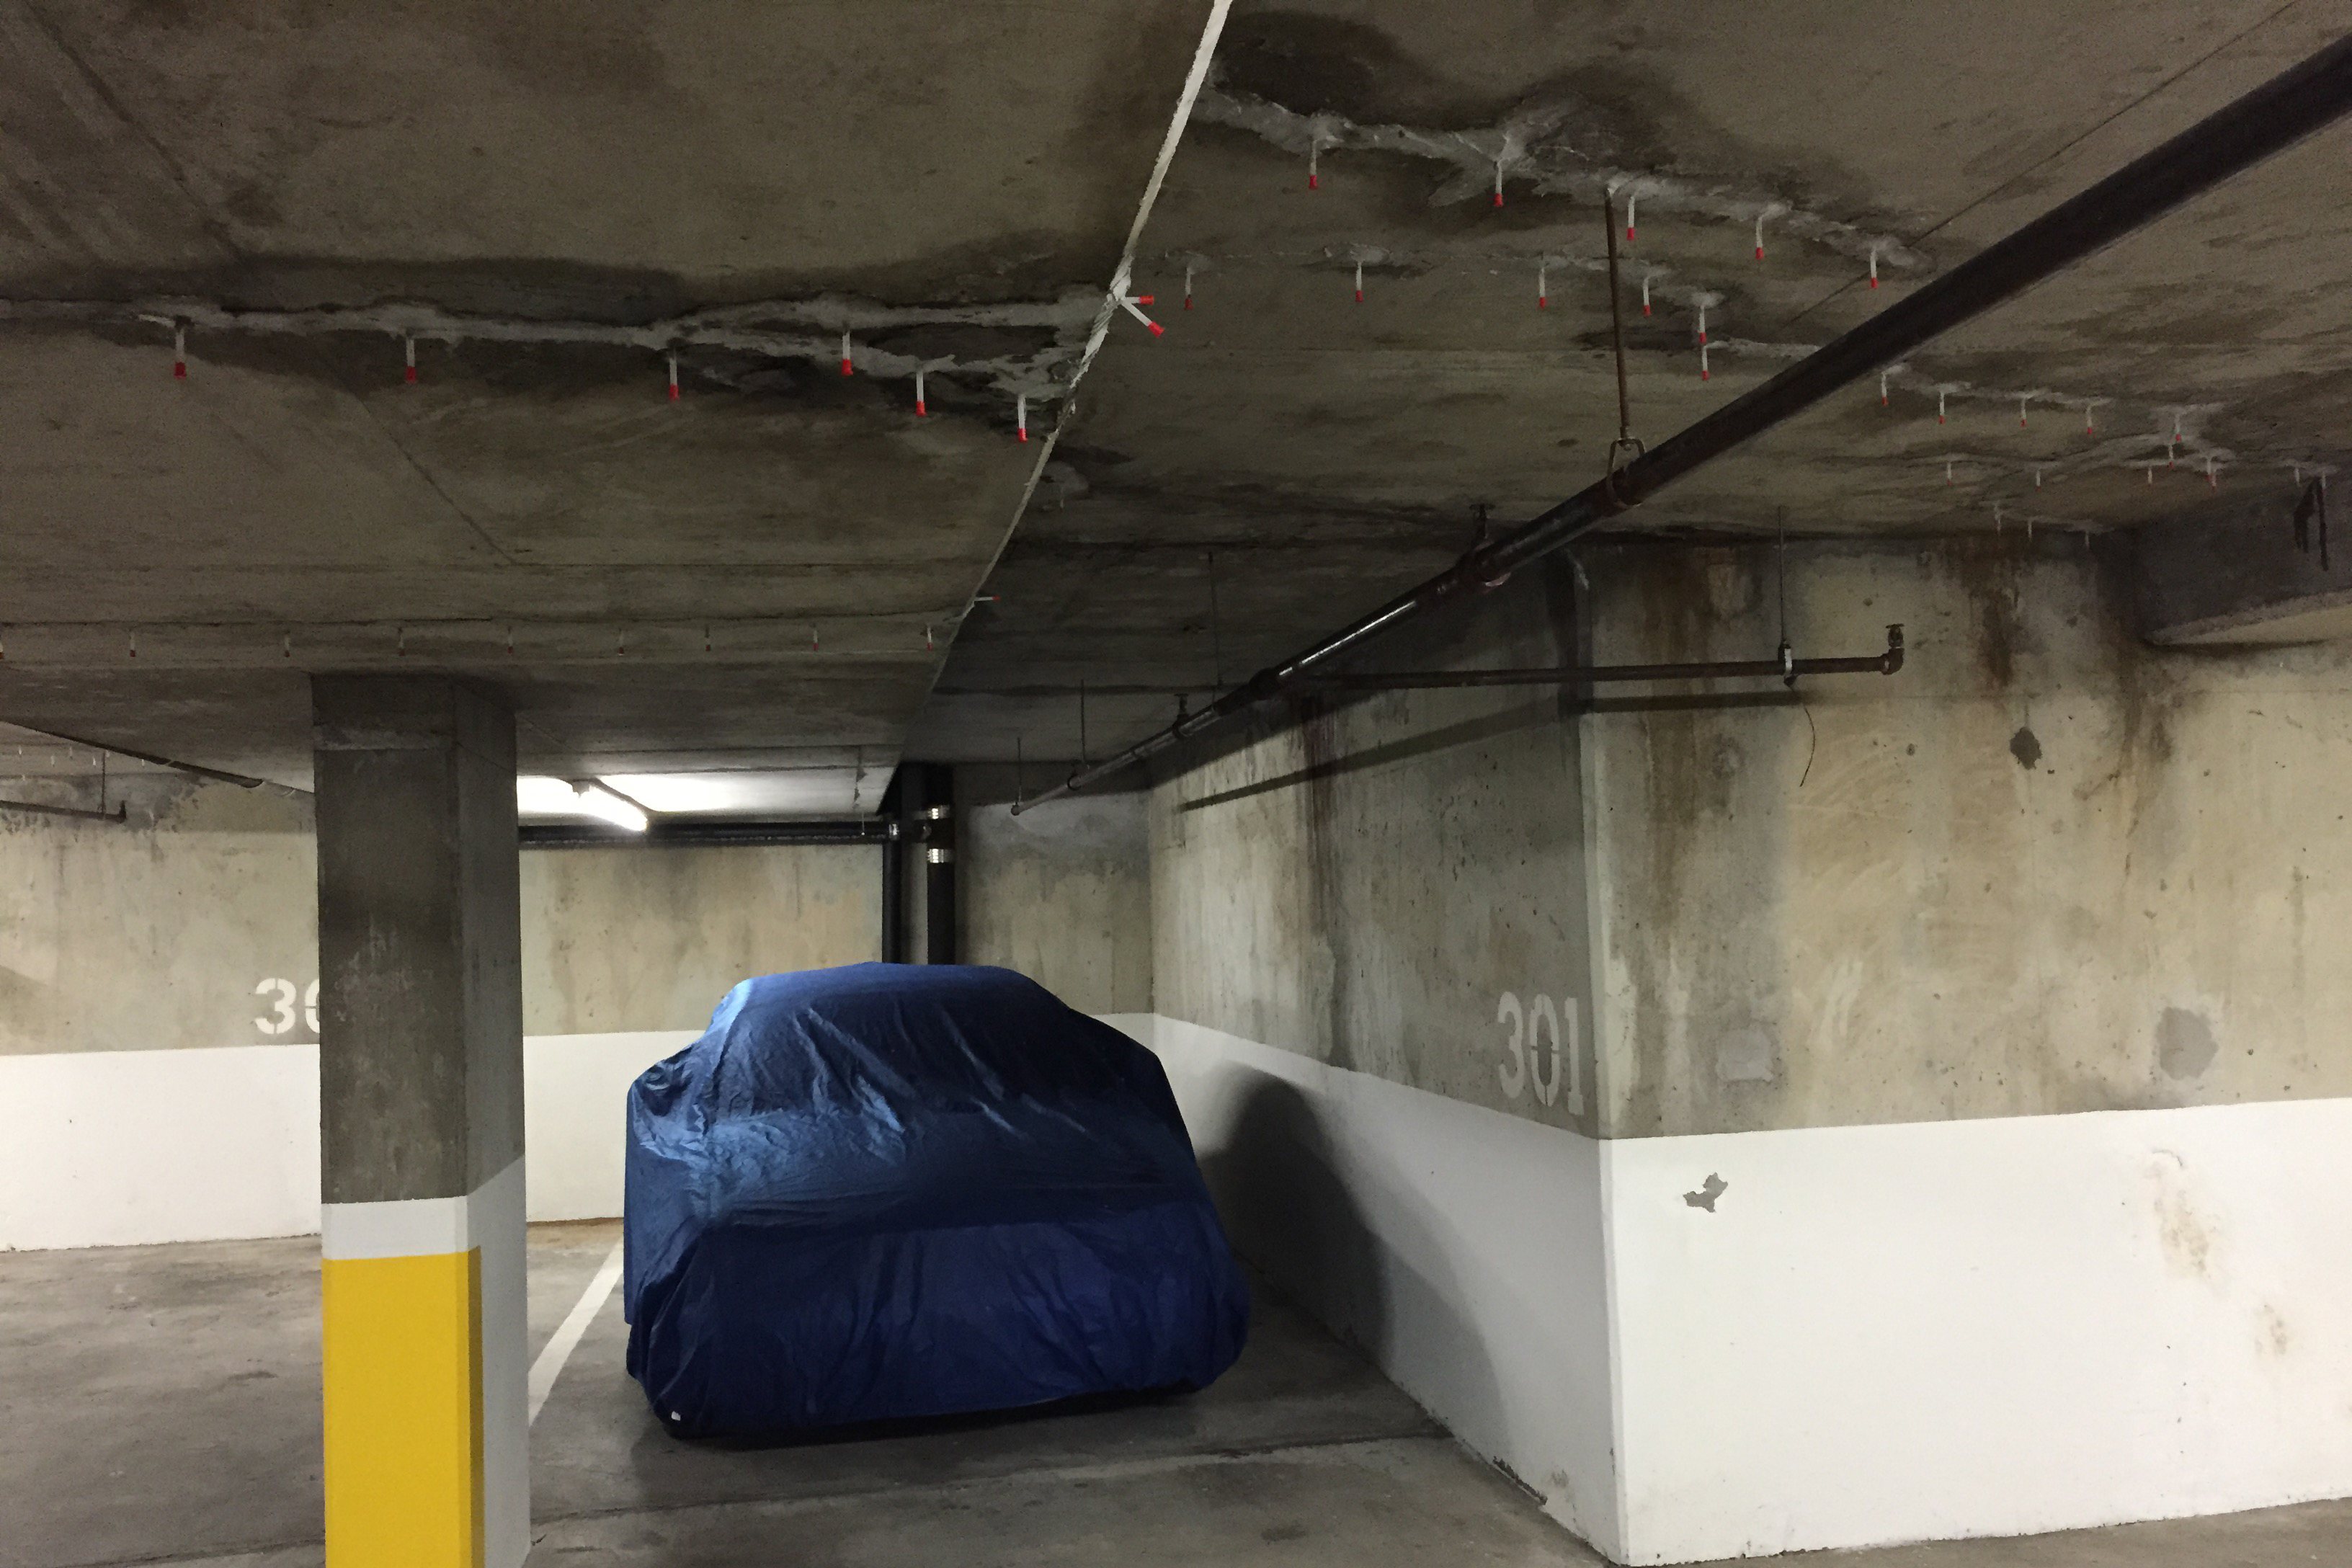 An unsightly epoxy injection has been done on concrete cracks in the ceiling of an underground parking lot.